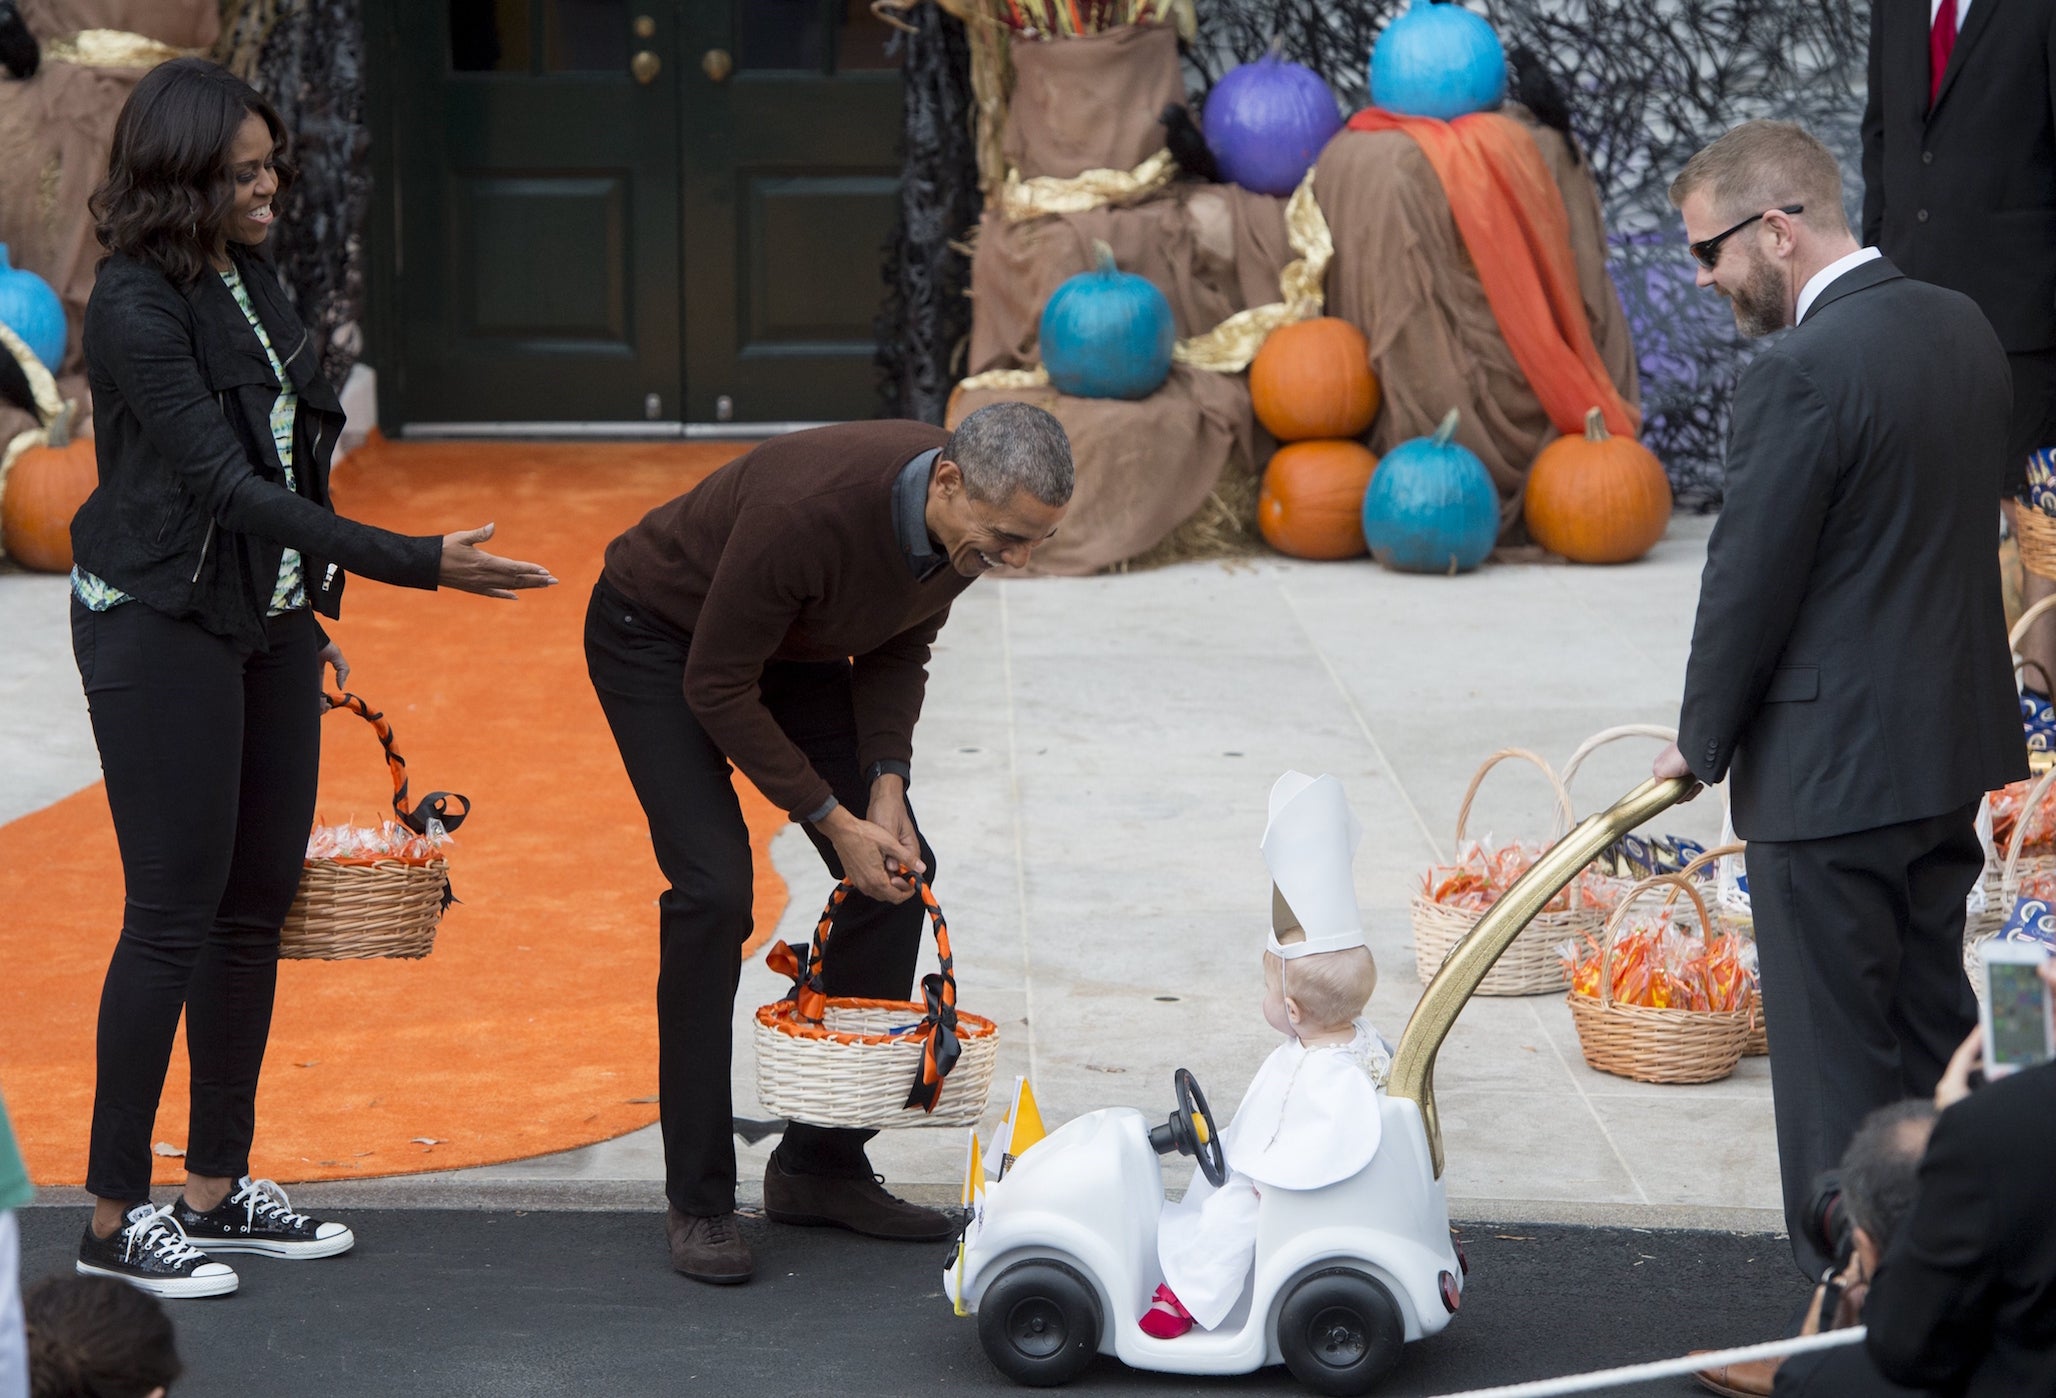 US President Barack Obama and First Lady Michelle Obama greet a young child dressed as the Pope and riding in a 'Popemobile' as he hands out treats to children trick-or-treating for Halloween on the South Lawn of the White House in Washington, DC, October 30, 2015